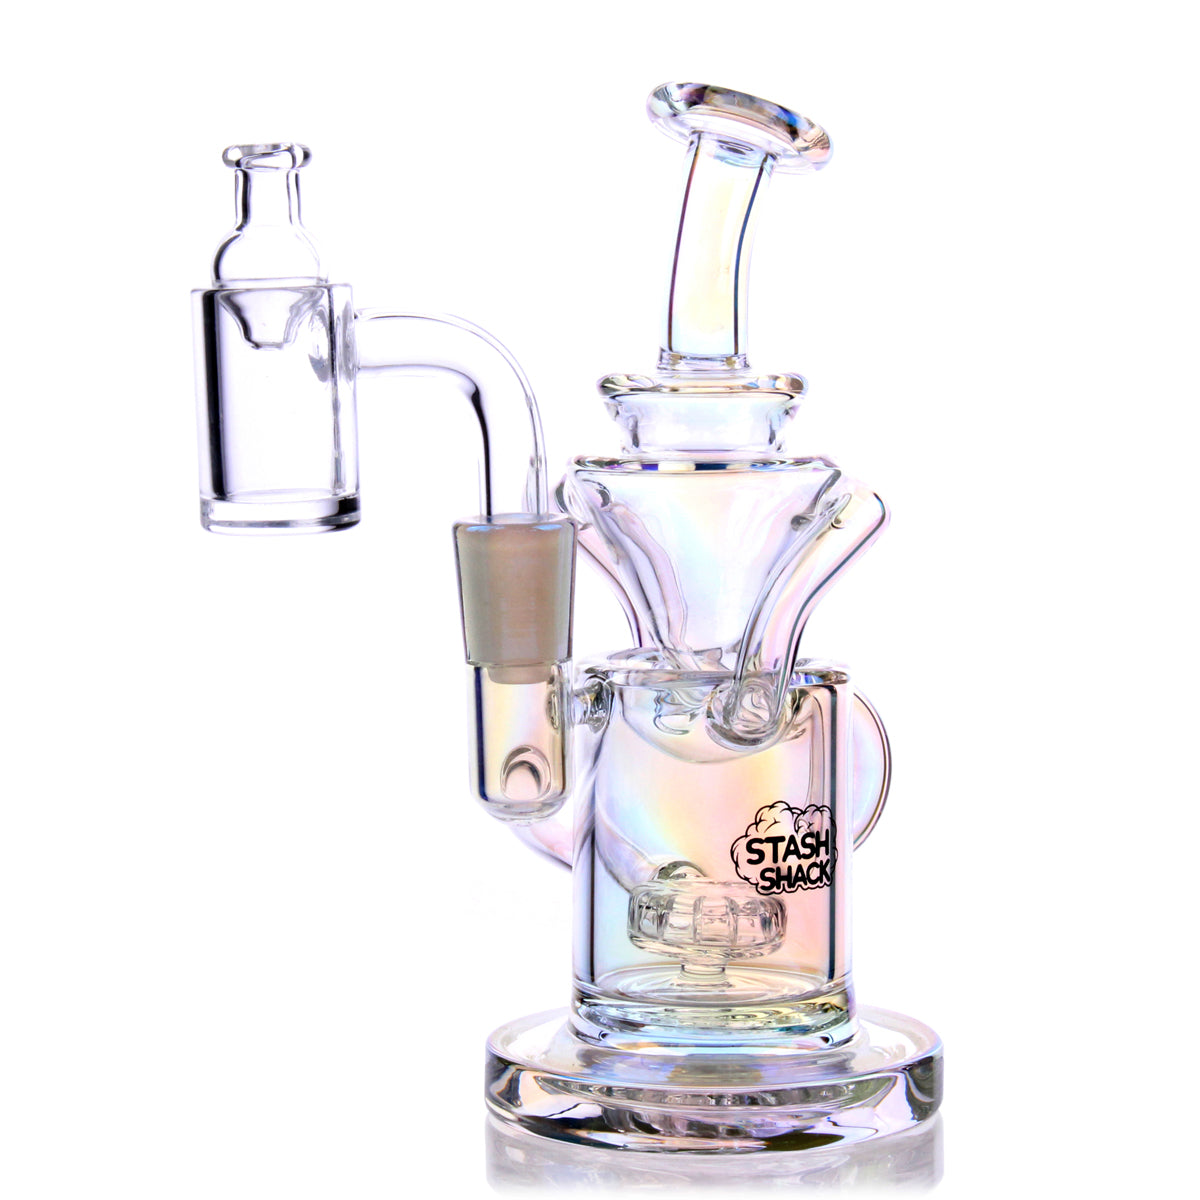 Desert Rose Mini Rig by The Stash Shack with Showerhead Percolator for Concentrates, Front View